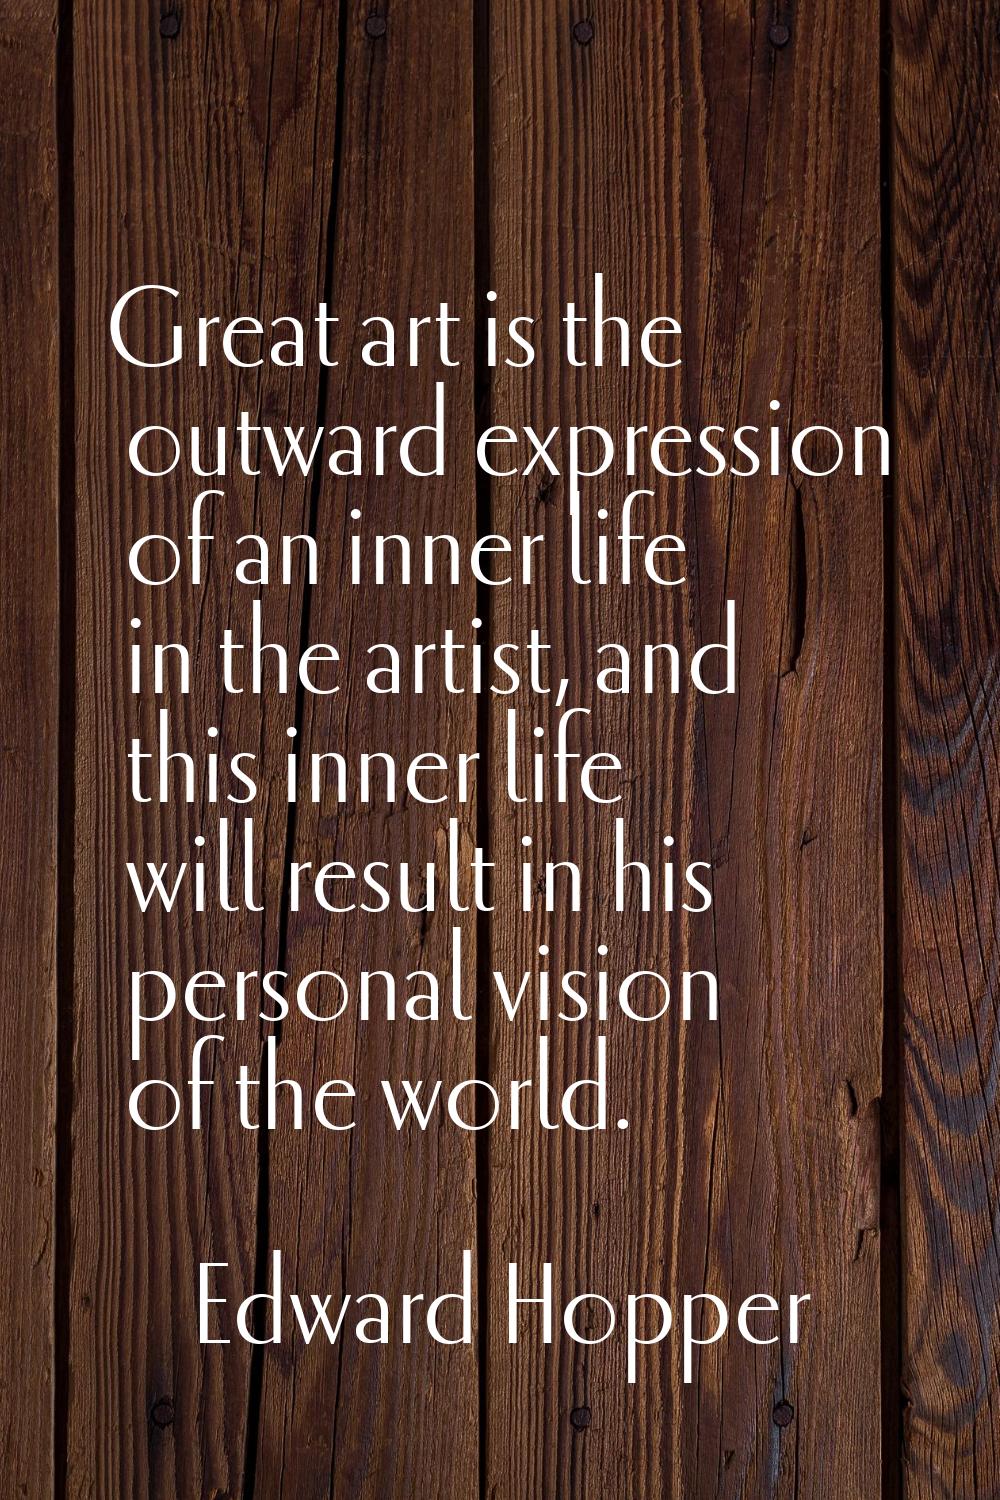 Great art is the outward expression of an inner life in the artist, and this inner life will result